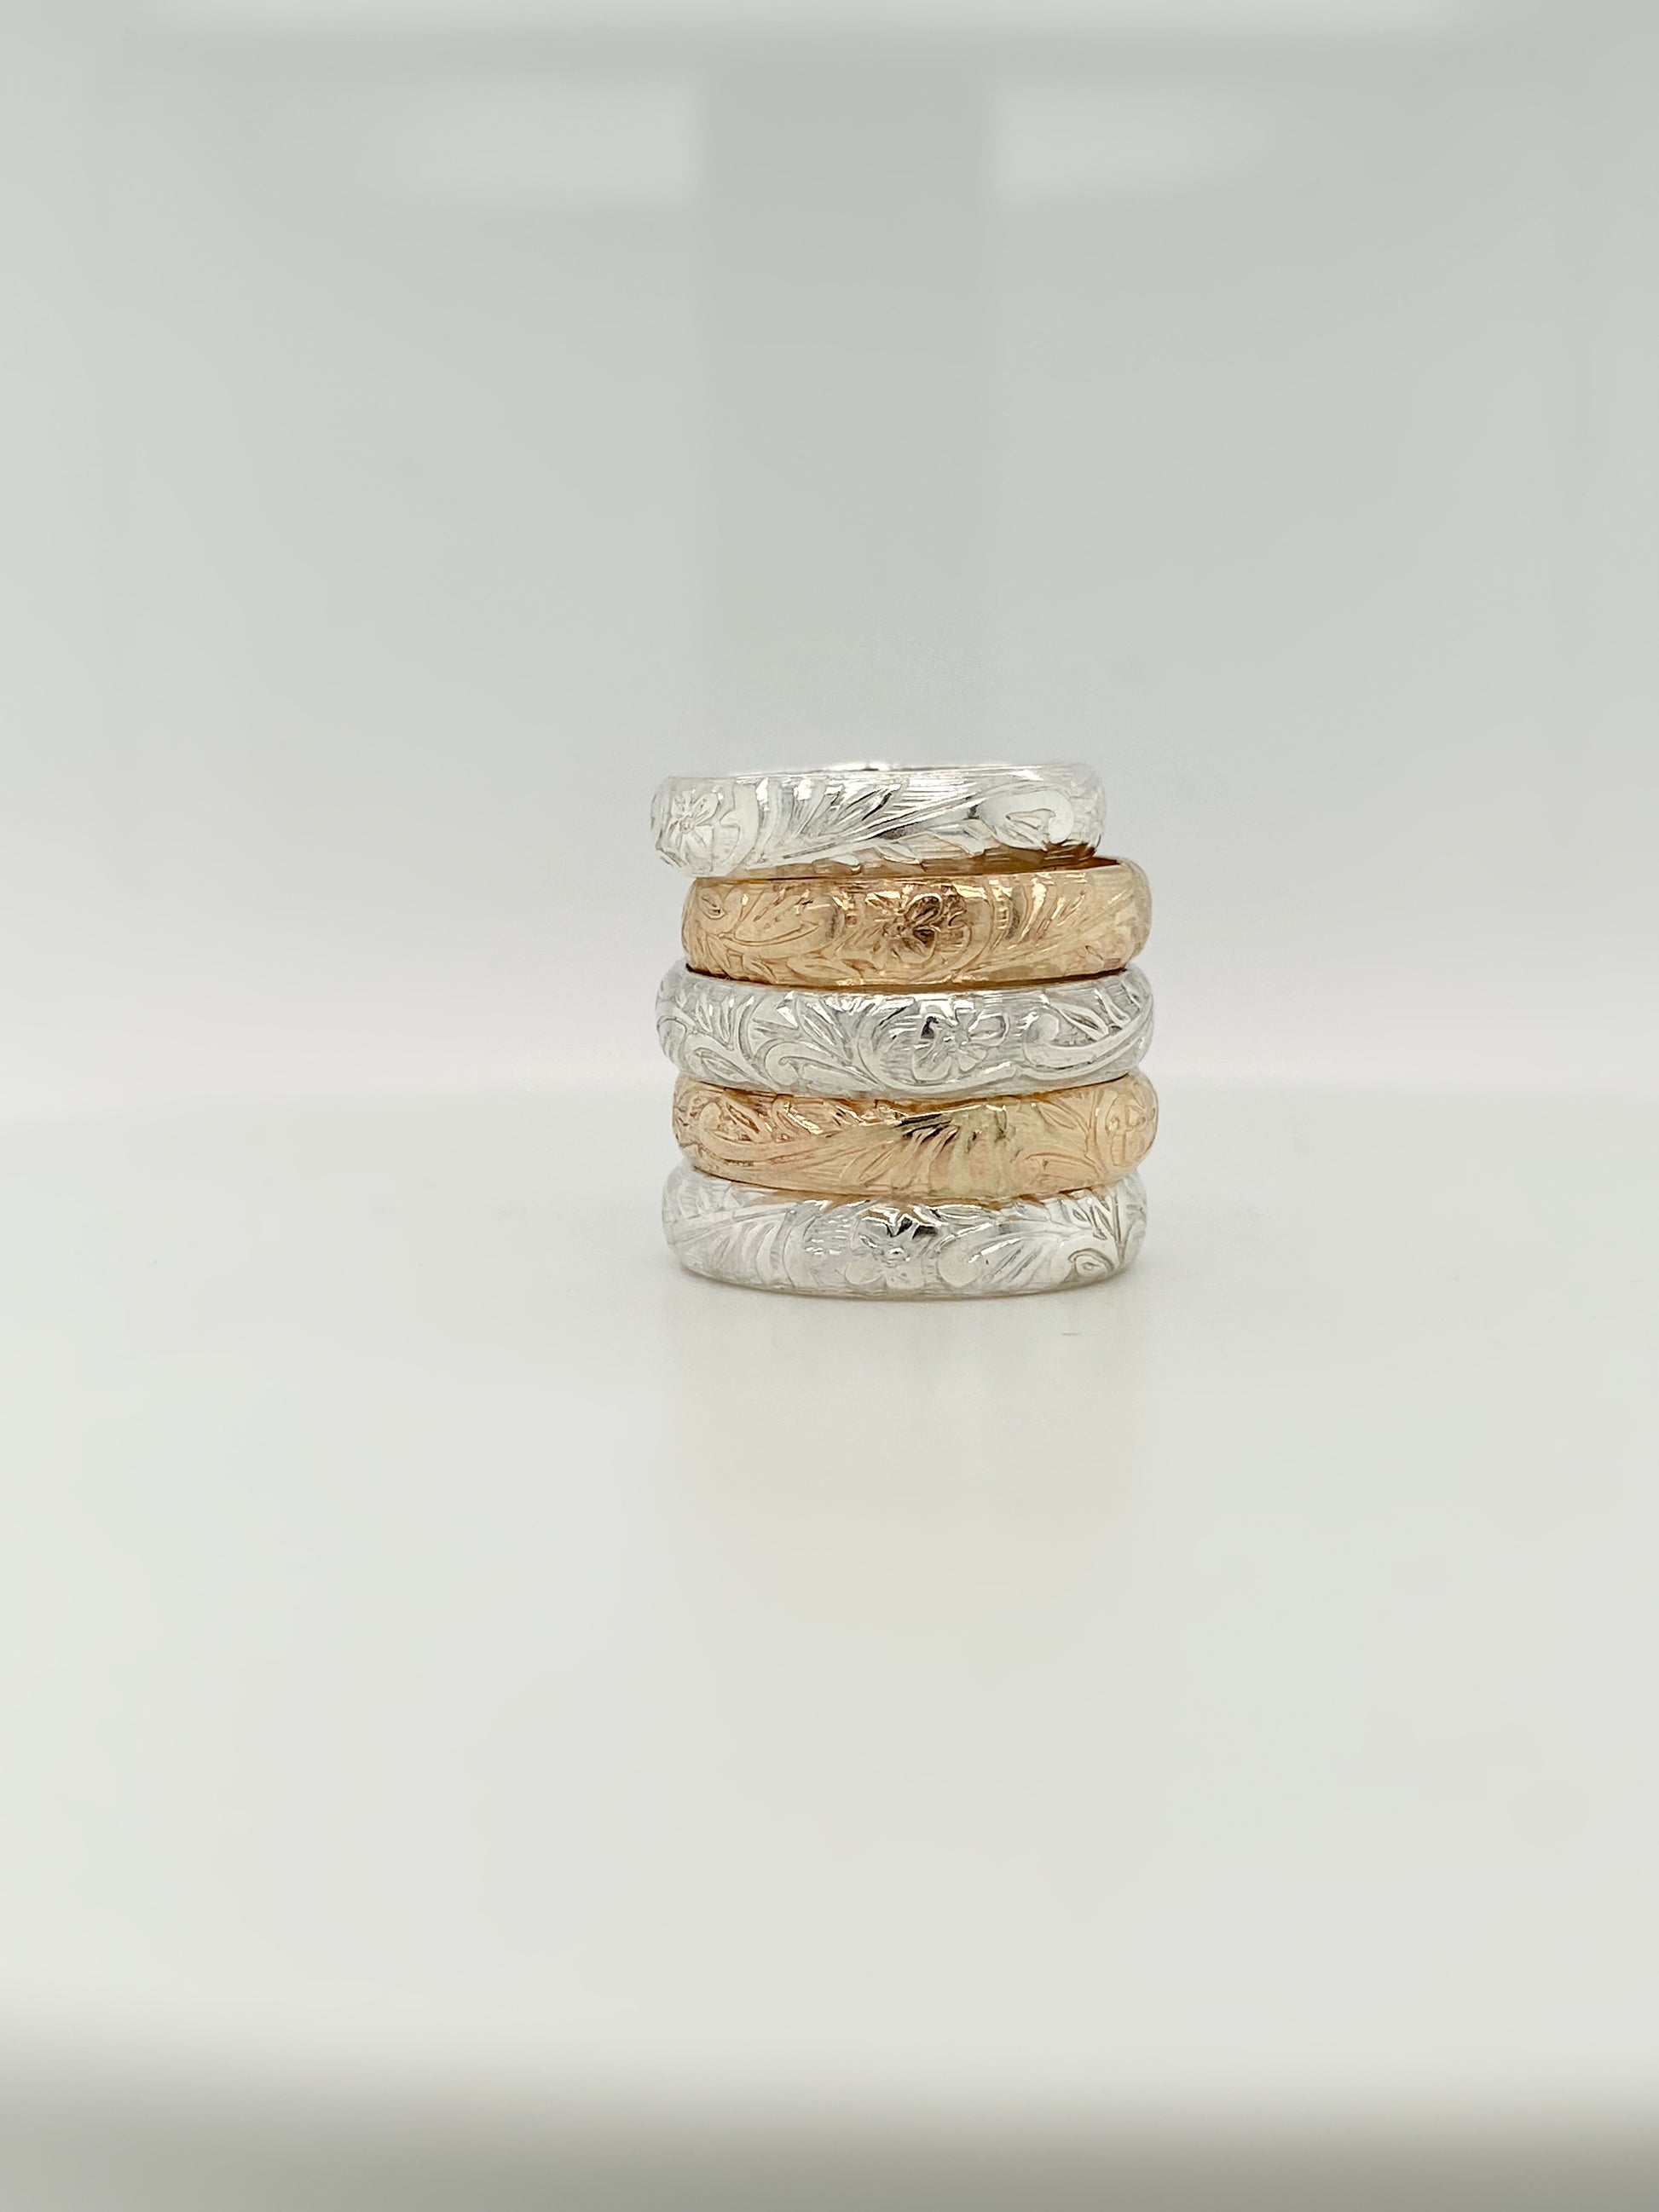 The Silver Blume Ring - Going Golden